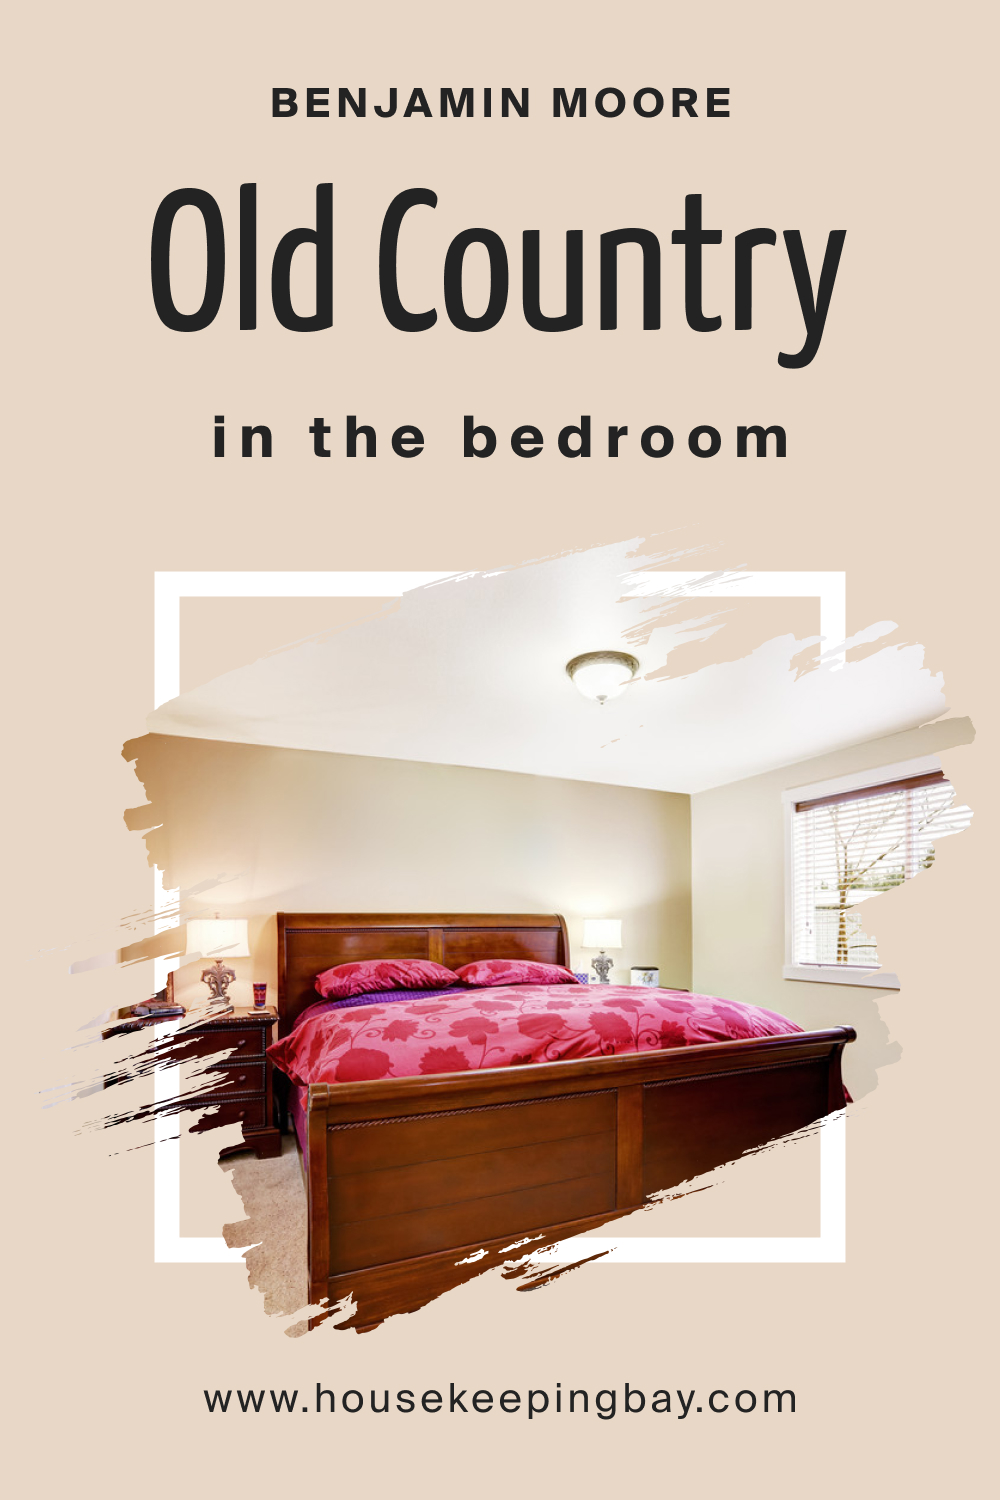 Benjamin Moore. Old Country OC 76 for the Bedroom